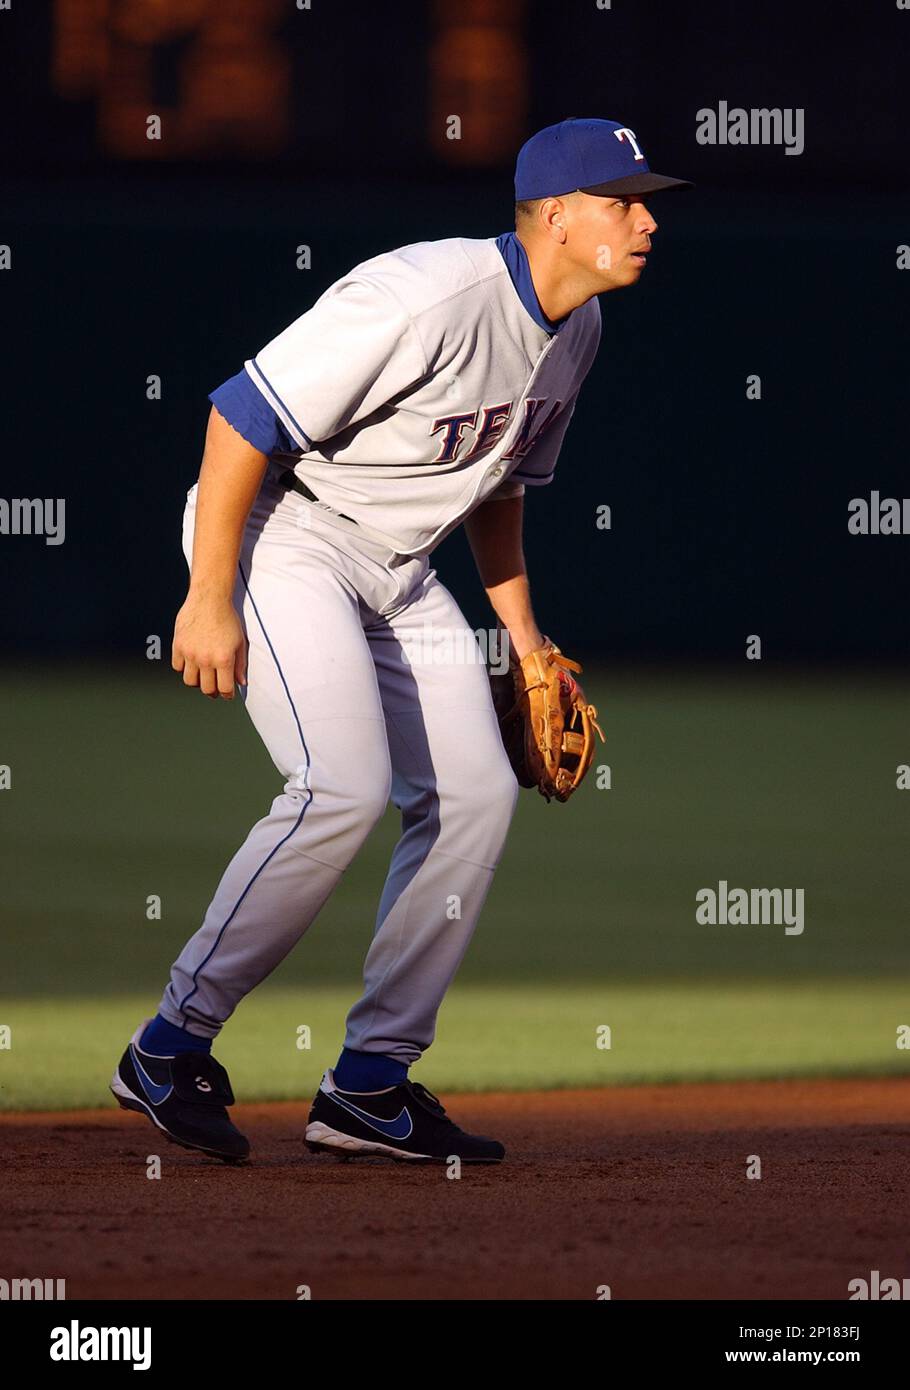 03 Jul. 2003: Texas Rangers shortstop Alex Rodriguez (3) on the field  during the first inning of a game played against the Anaheim Angels played  at Angel Stadium of Anaheim in Anaheim